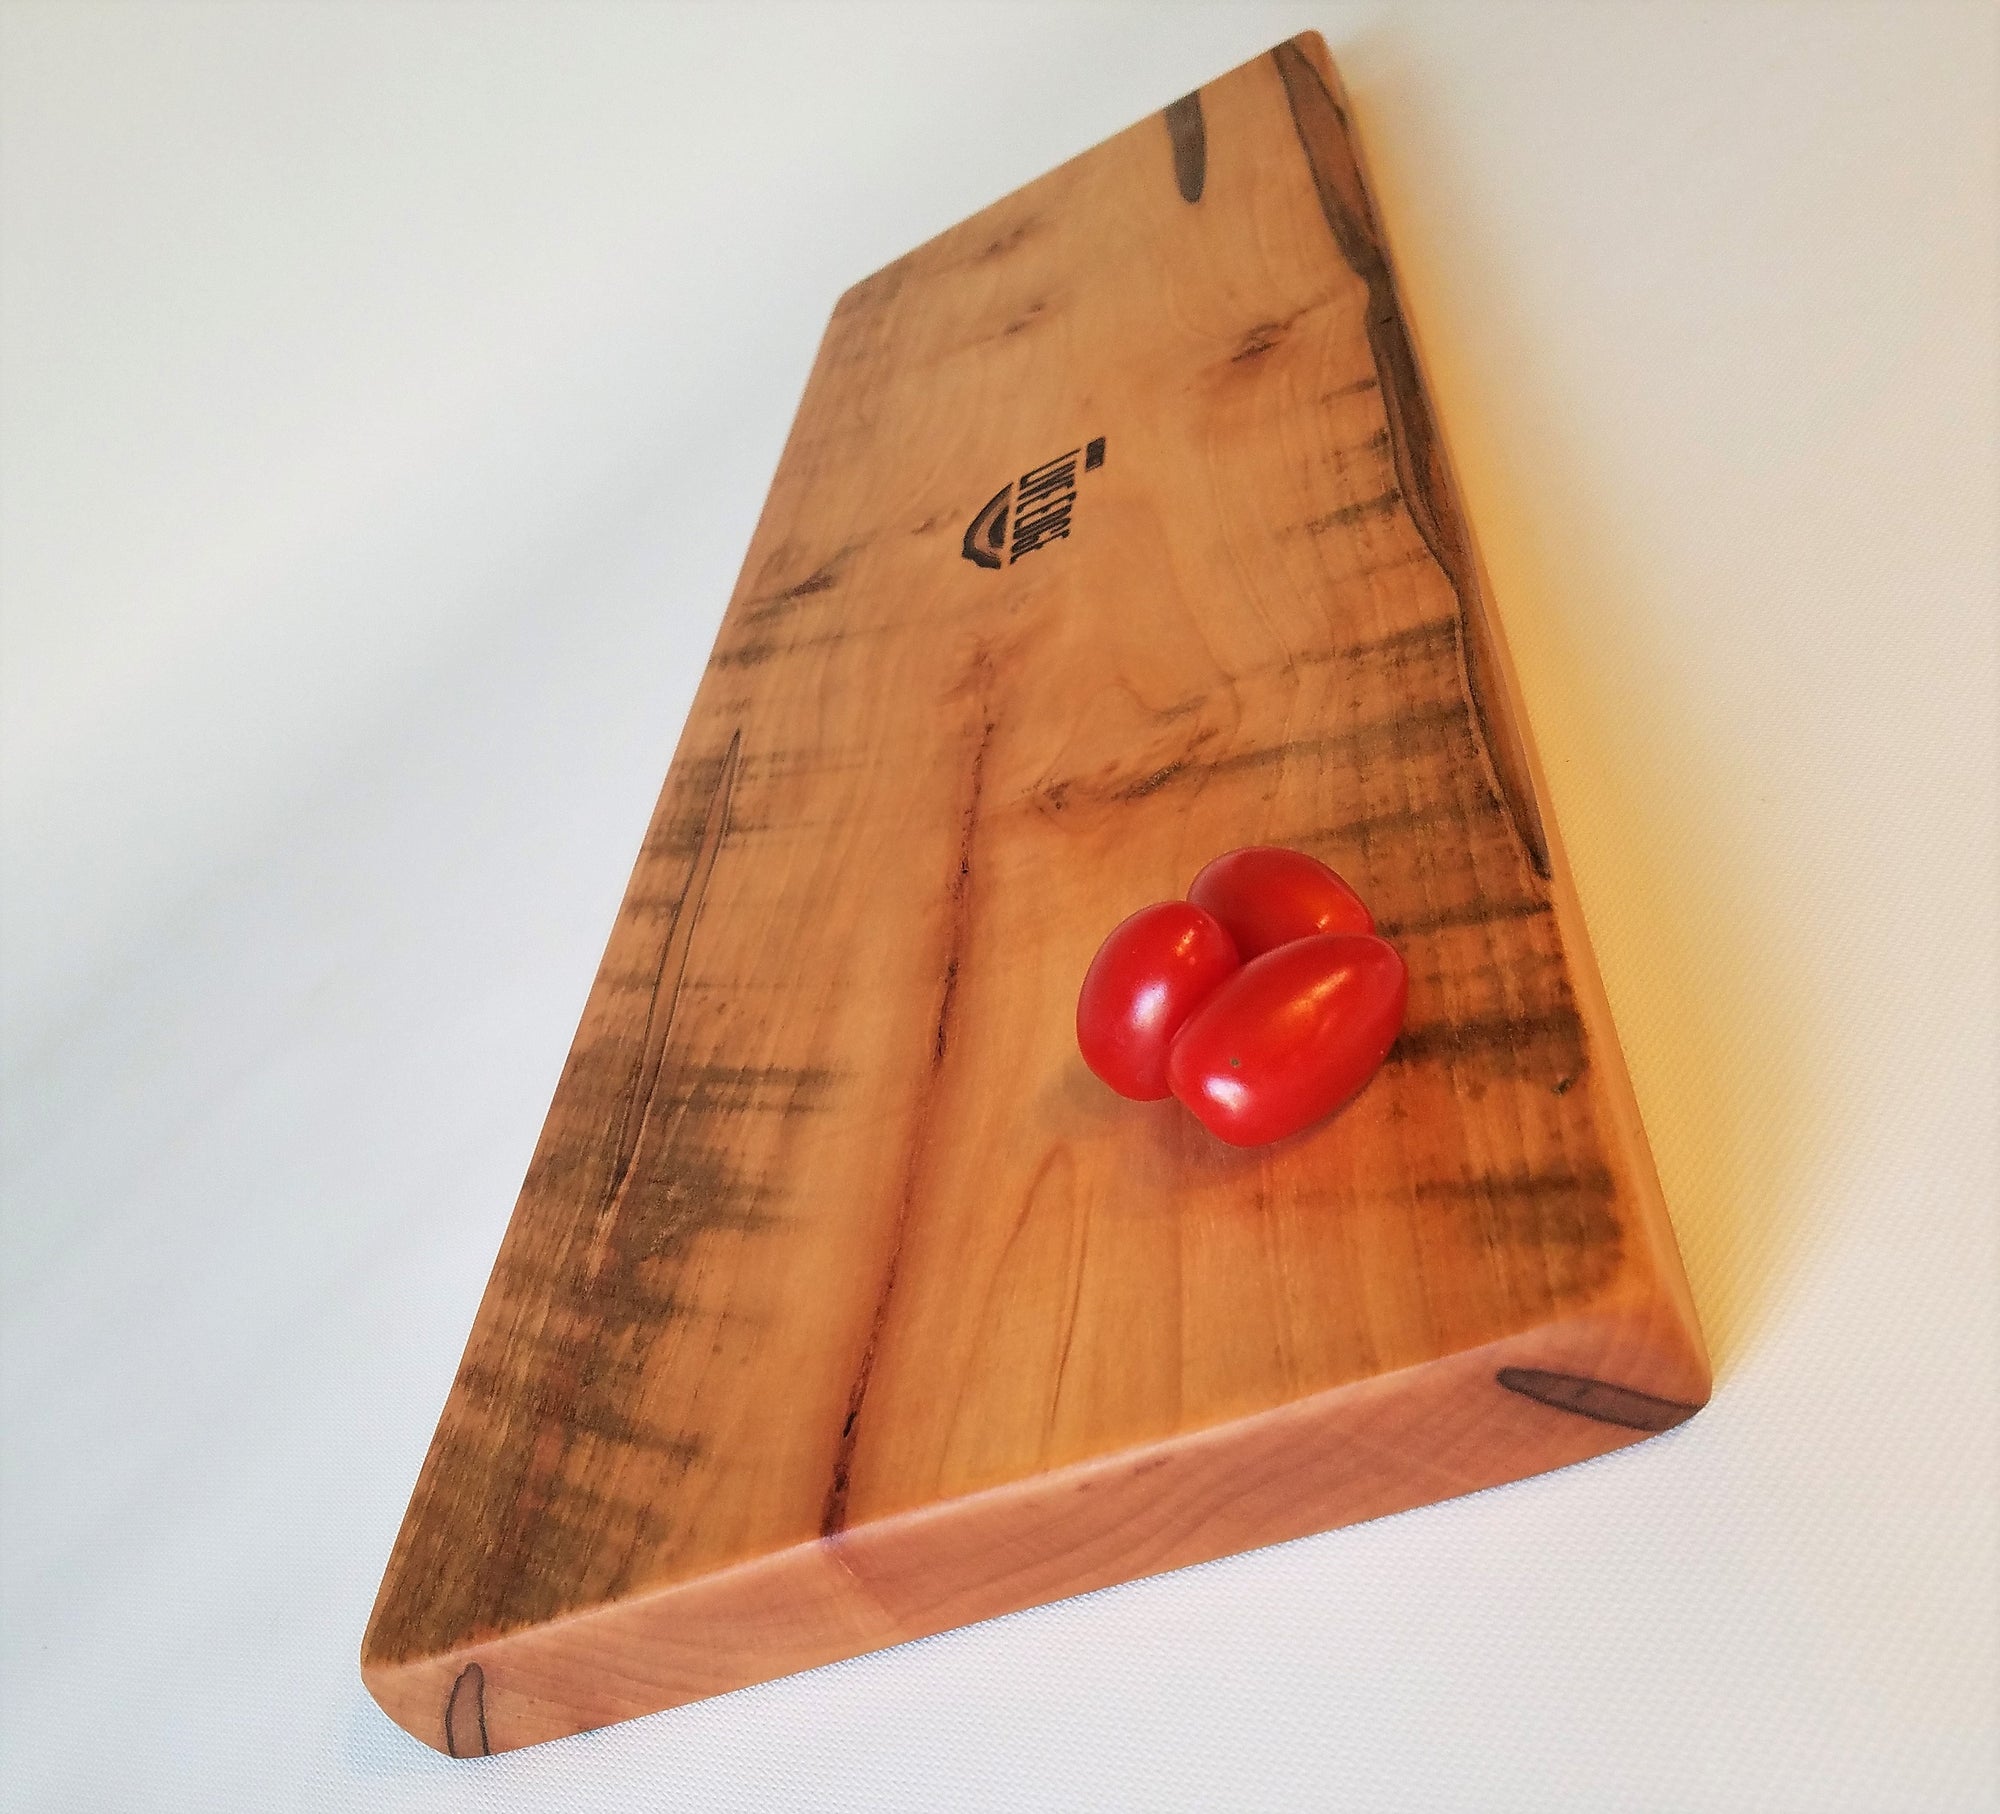 Wooden Serving Board- Reclaimed Wood- Charcuterie- Cheese Board- Cutting Board- Gift- Foodie- Chef- Party- Reclaimed Wood- Ambrosia Maple